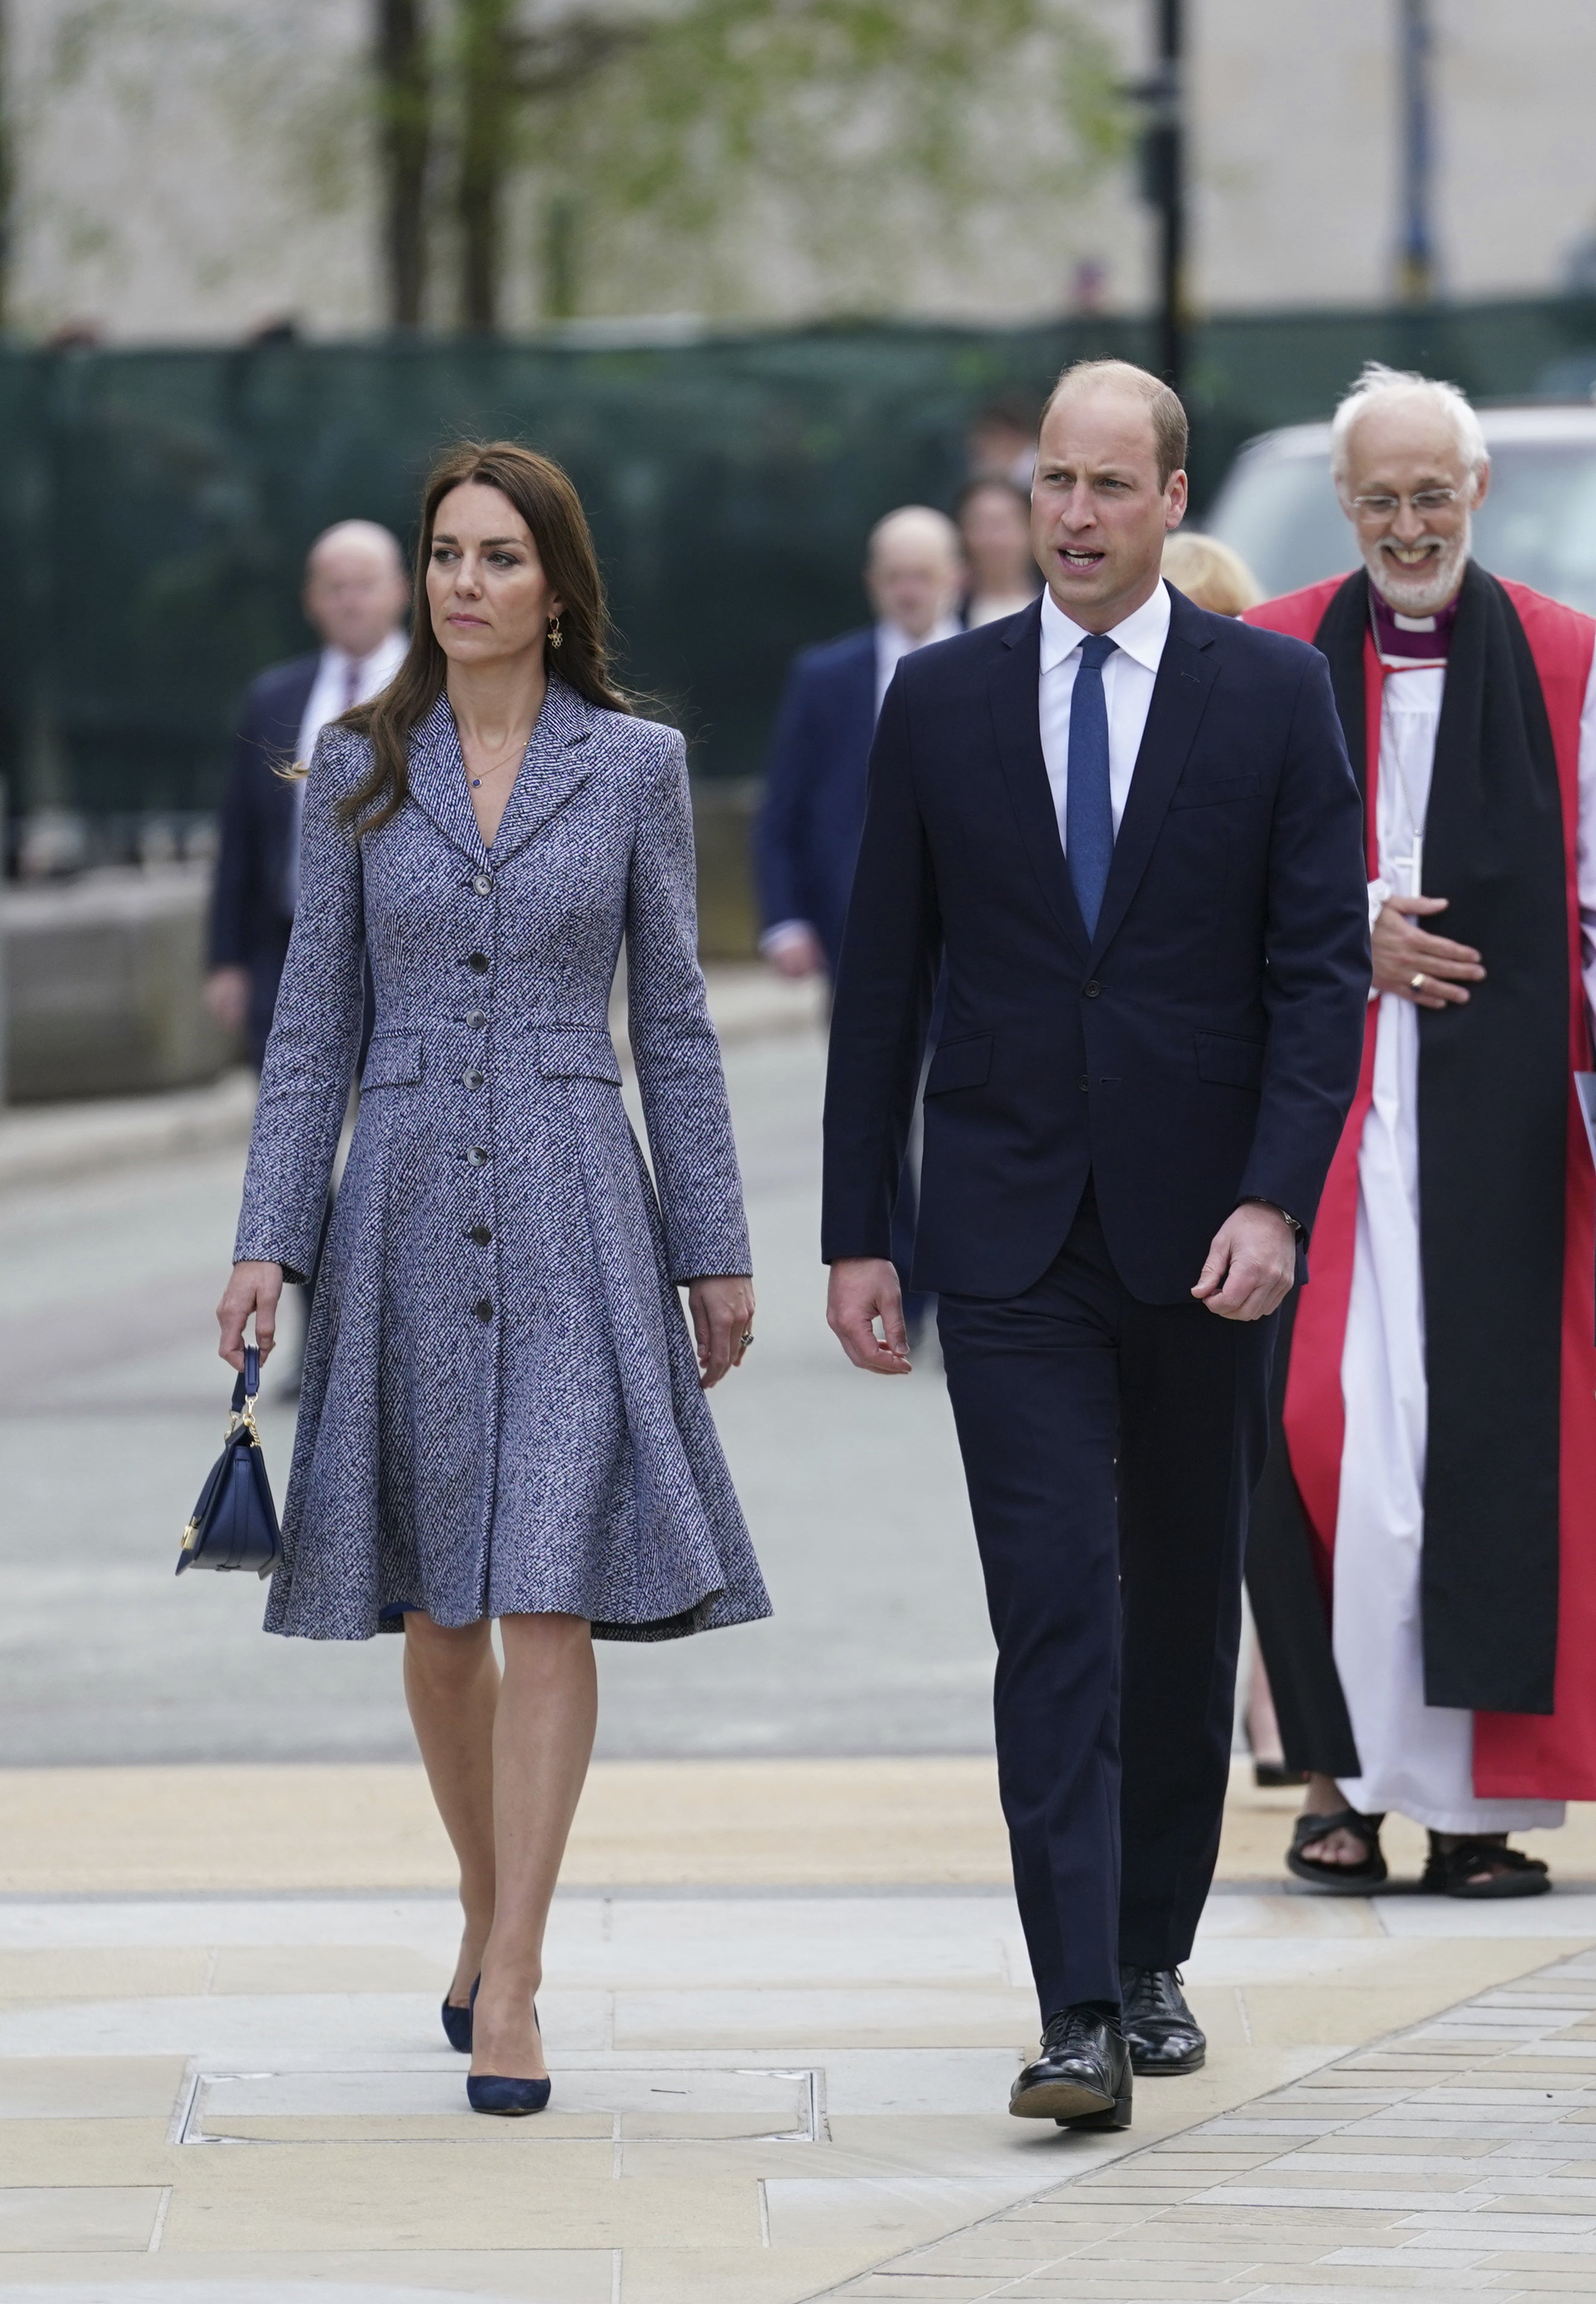 The Duke and Duchess of Cambridge attend the official opening of the Glade of Light memorial (Jon Super/PA)